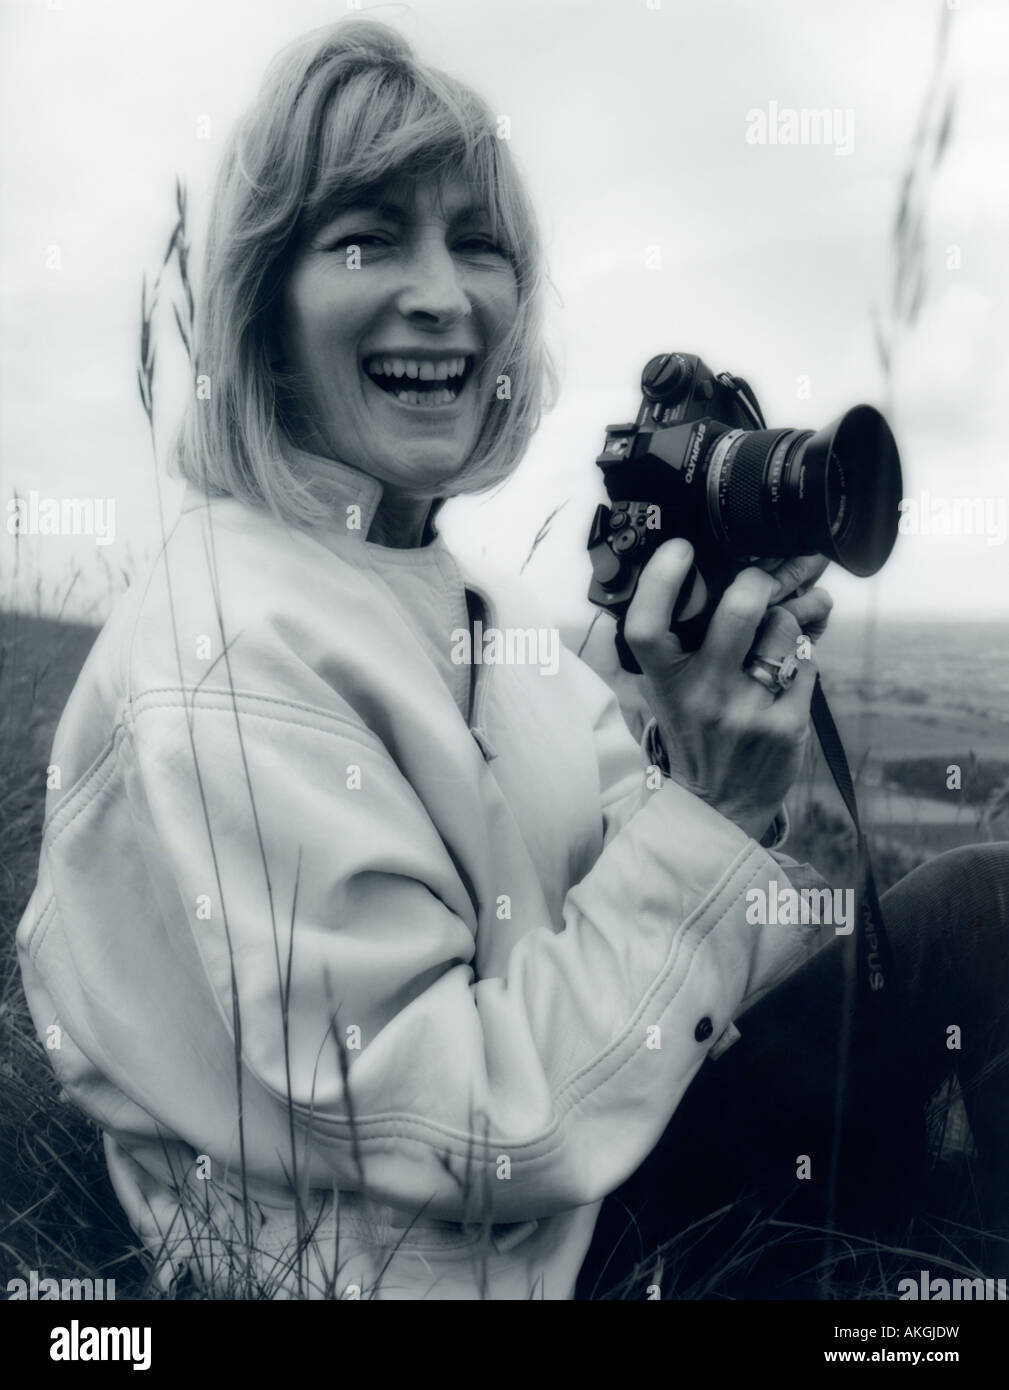 Candid portrait of woman holding SLR camera. Black and white photo, 1980s. Stock Photo